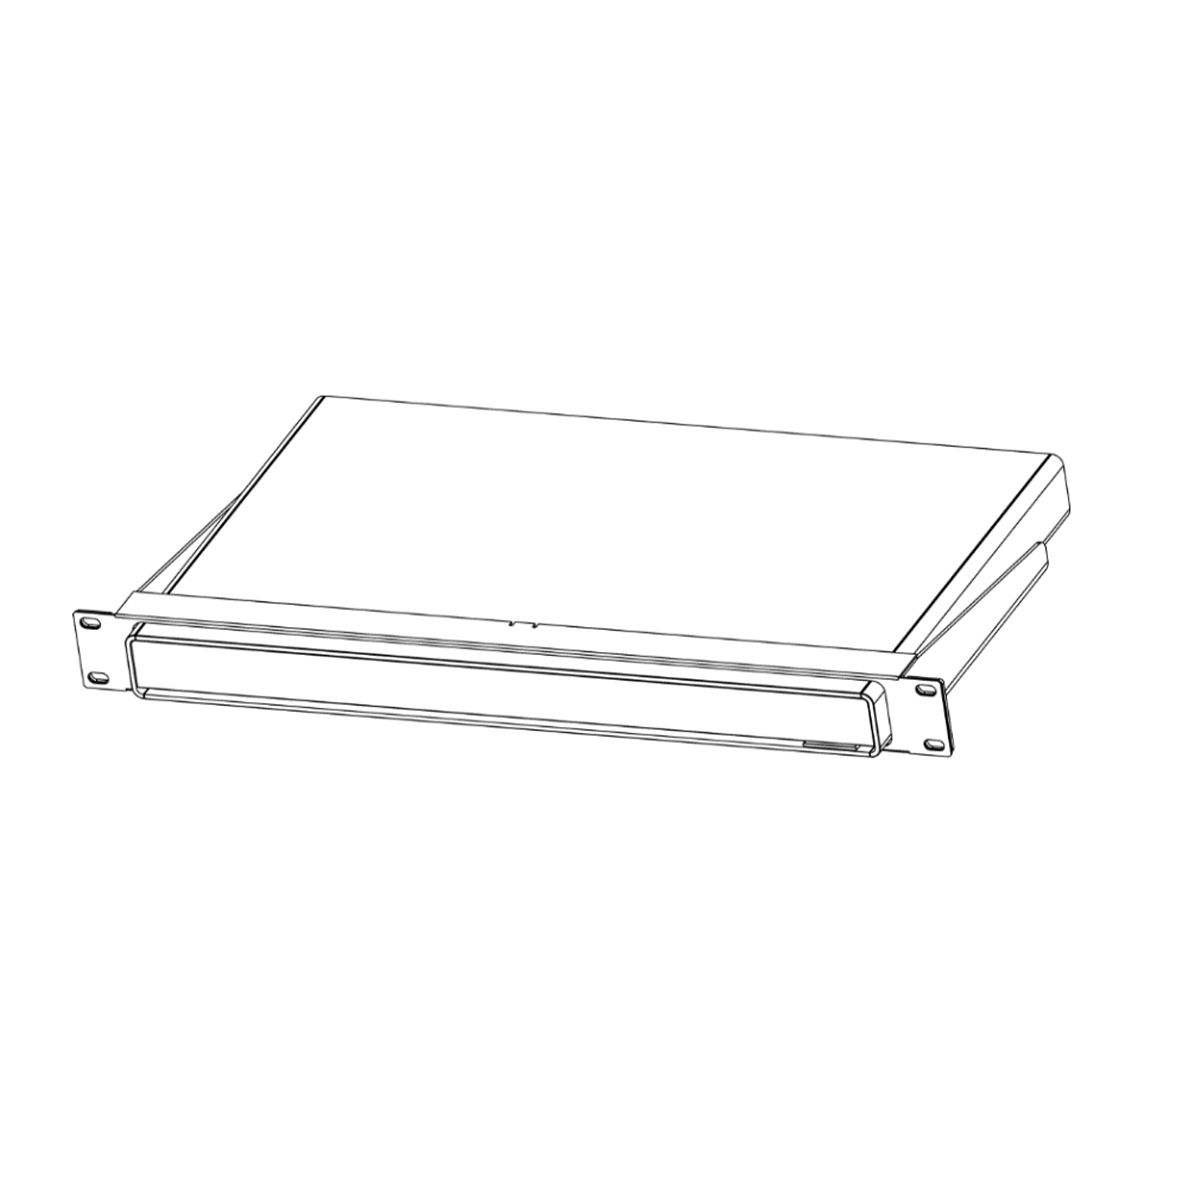 Kaleidescape Strato Rack-Mount Hardware technical drawing